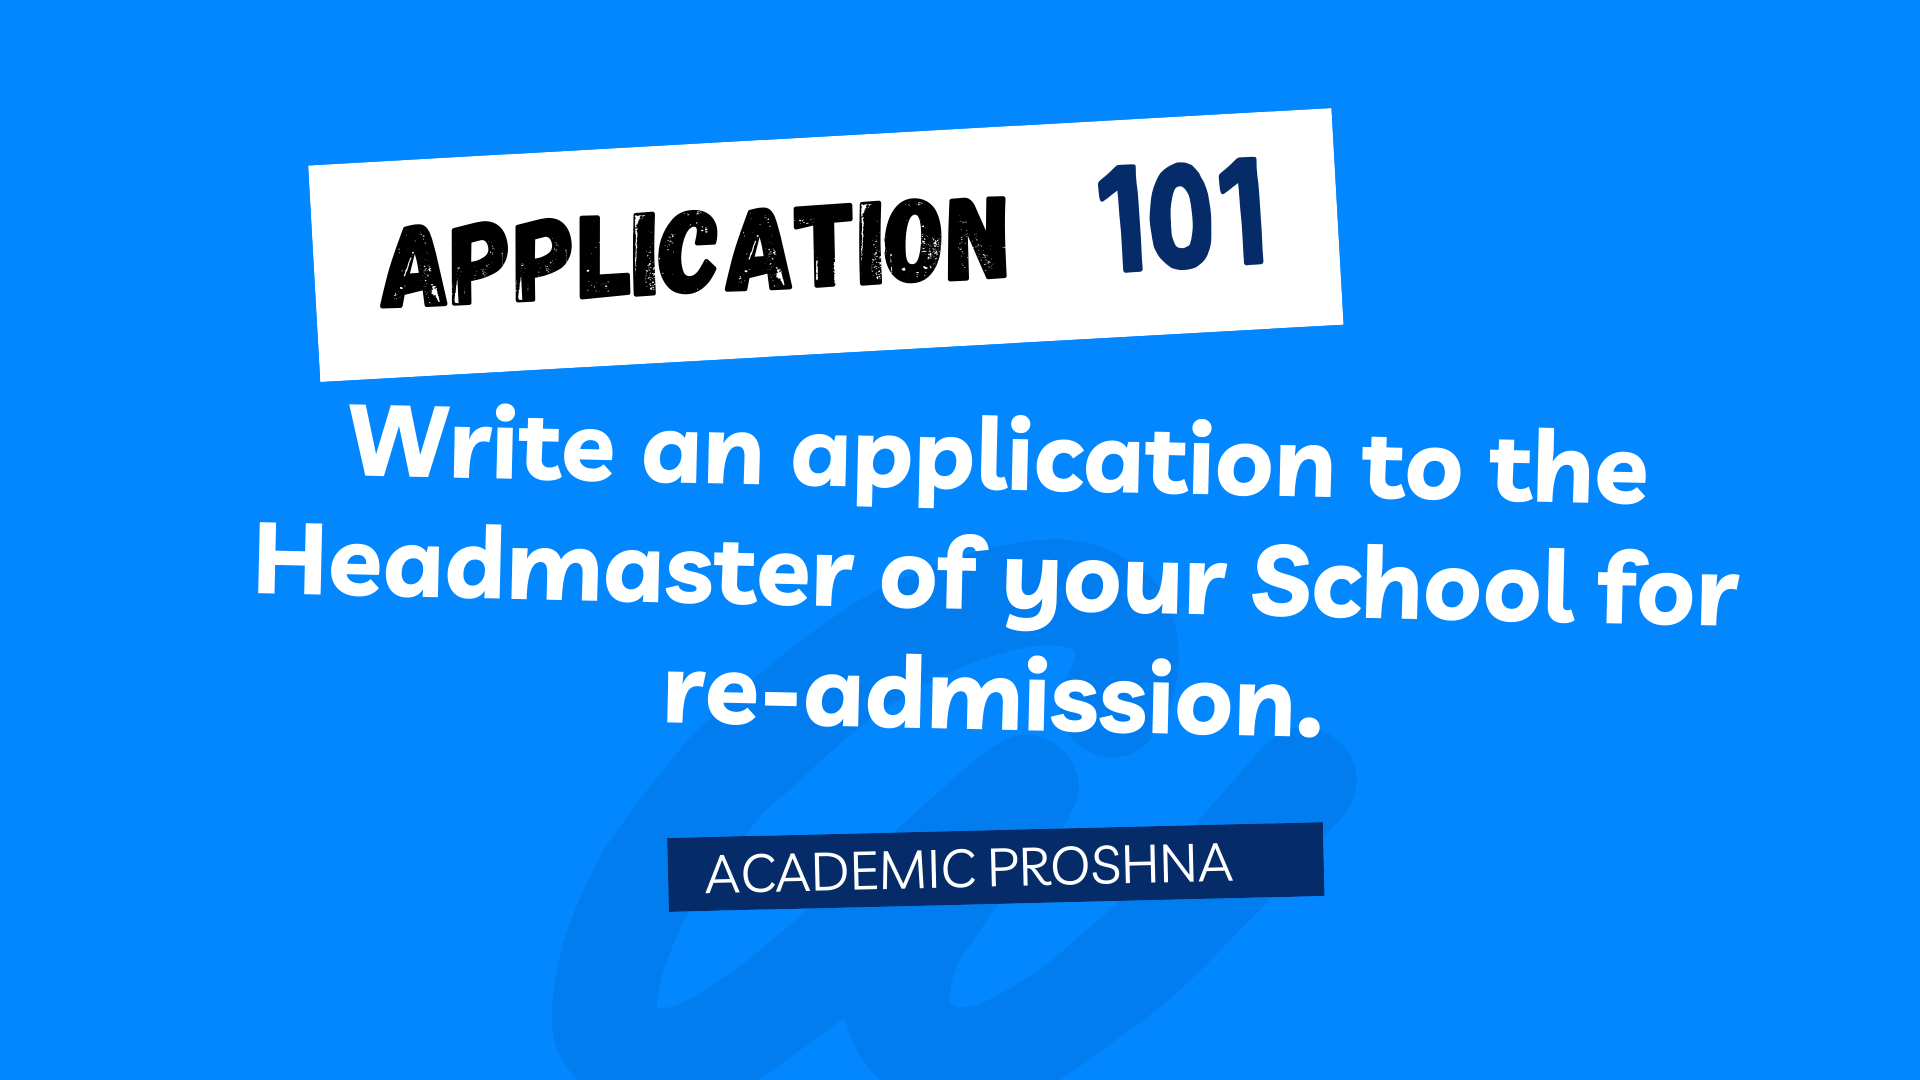 An application to the Headmaster for re-admission